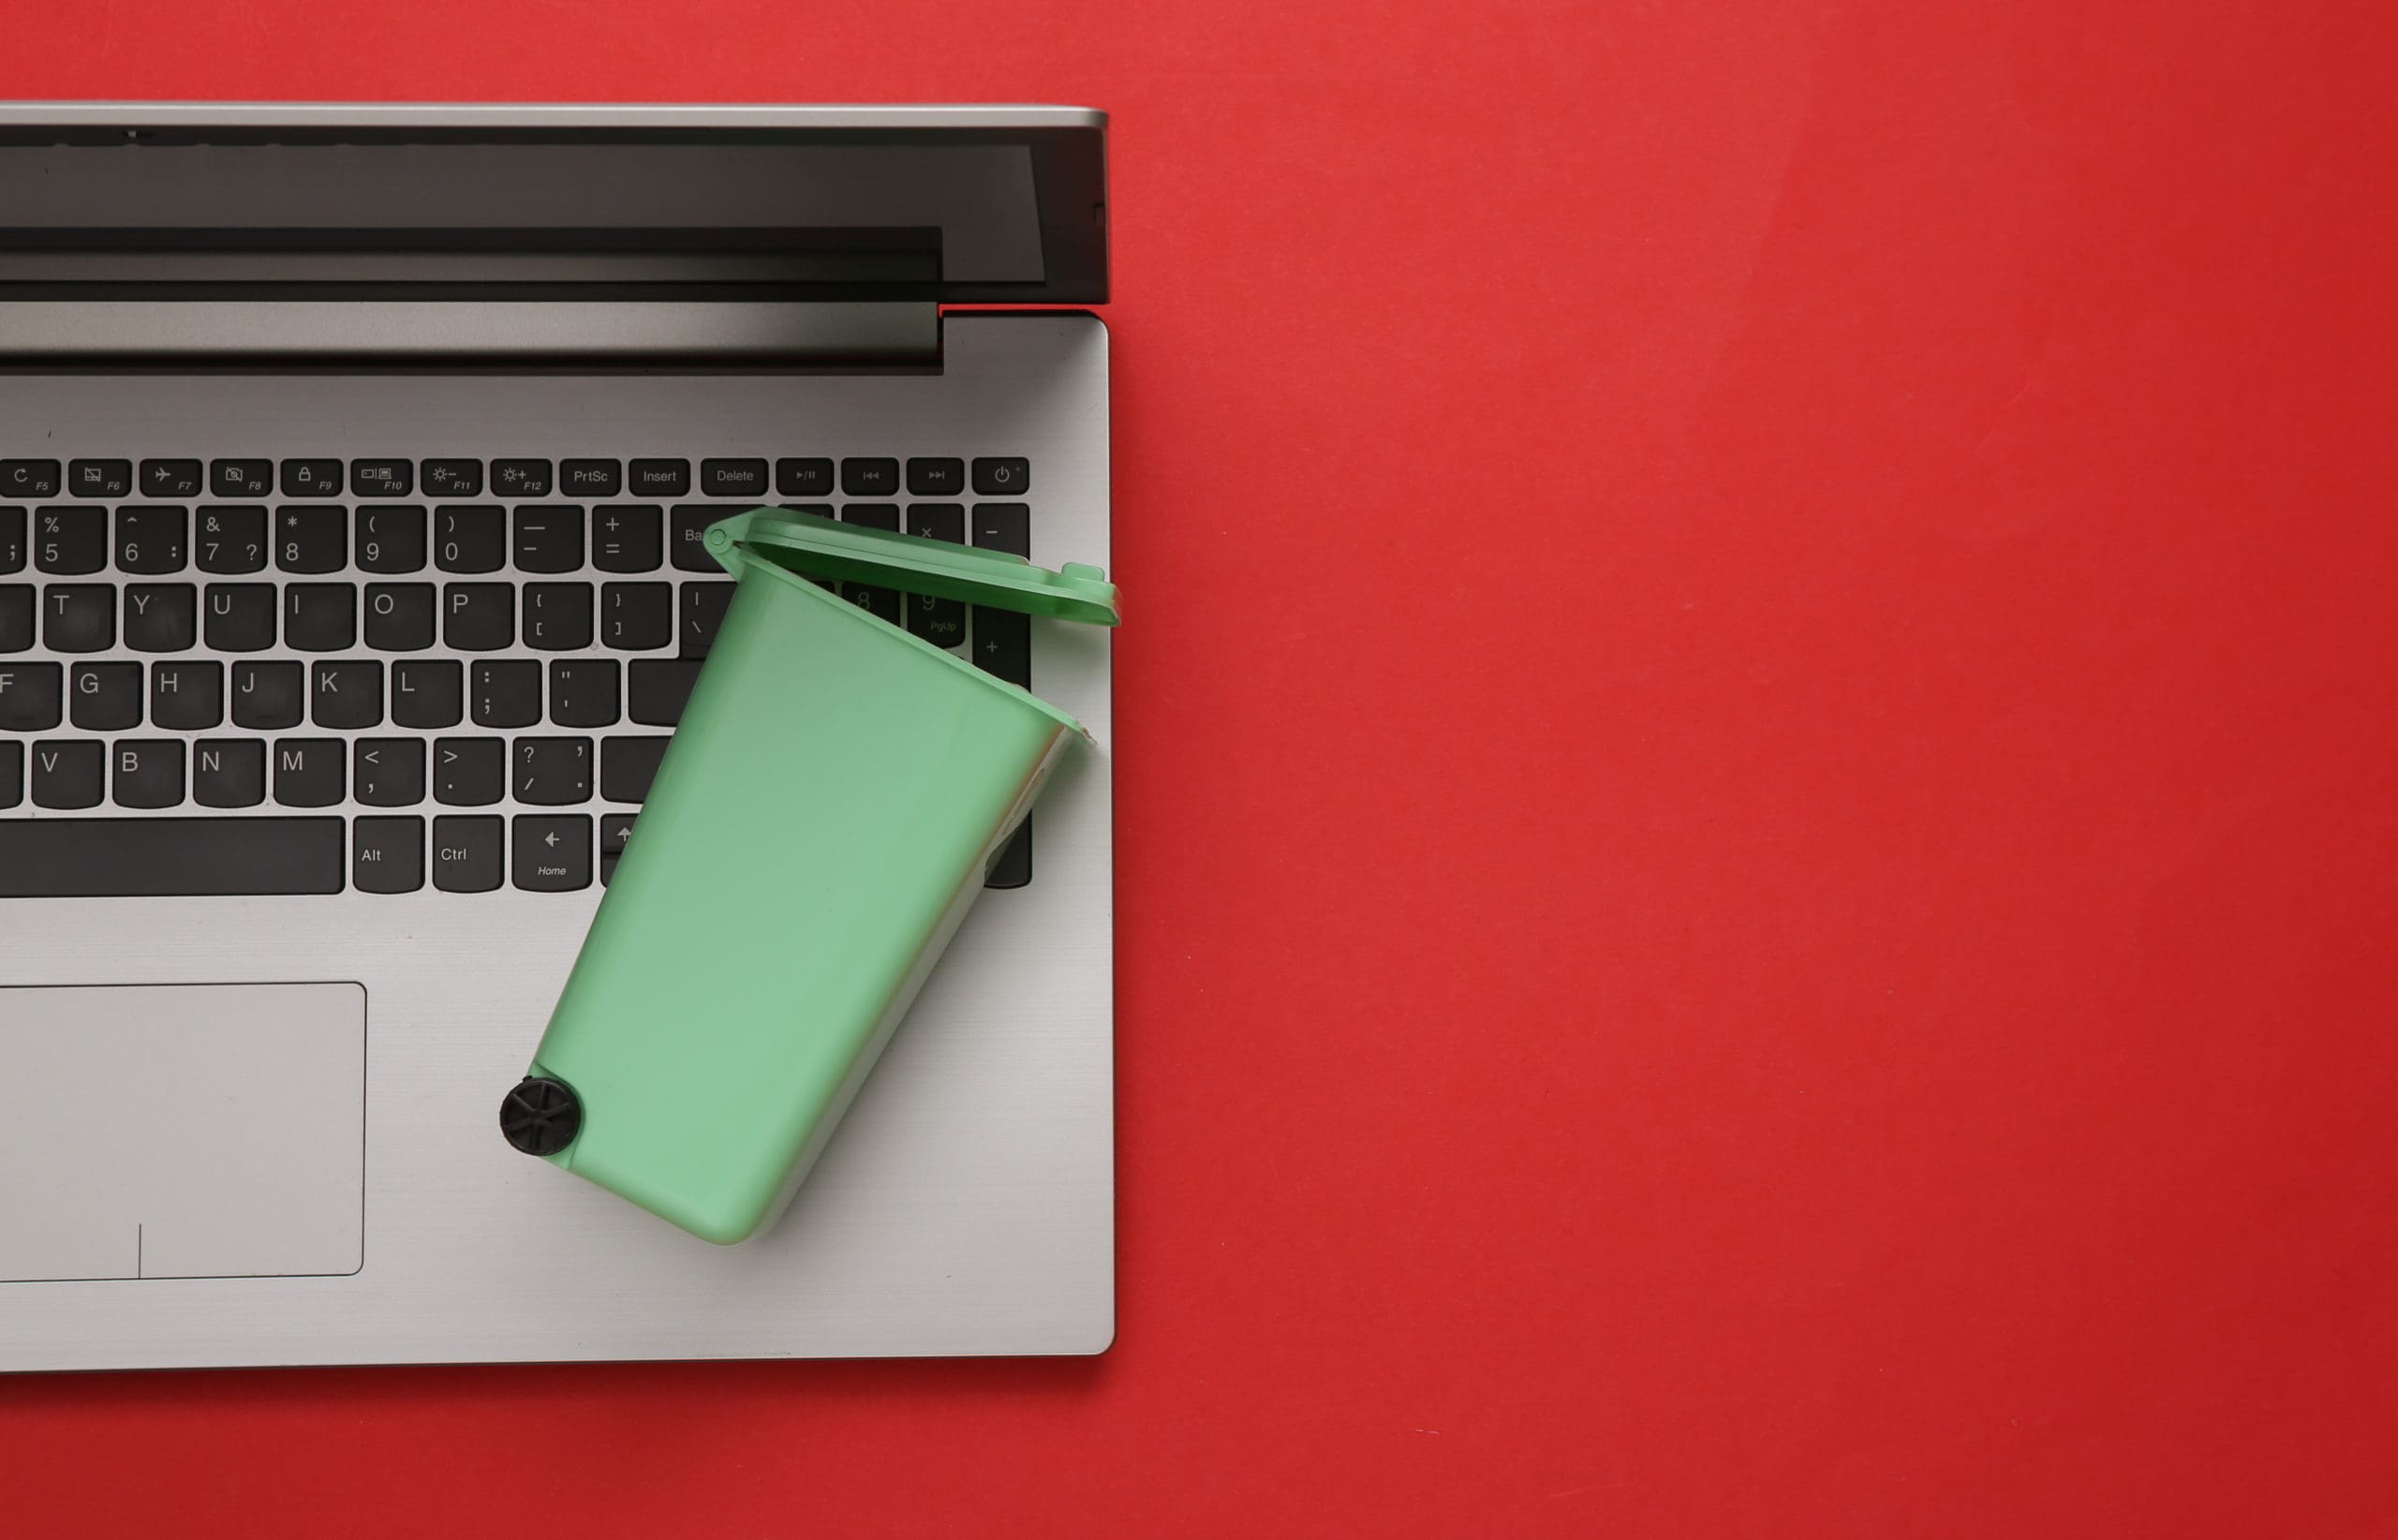 A laptop on a red background with a green cup on it.